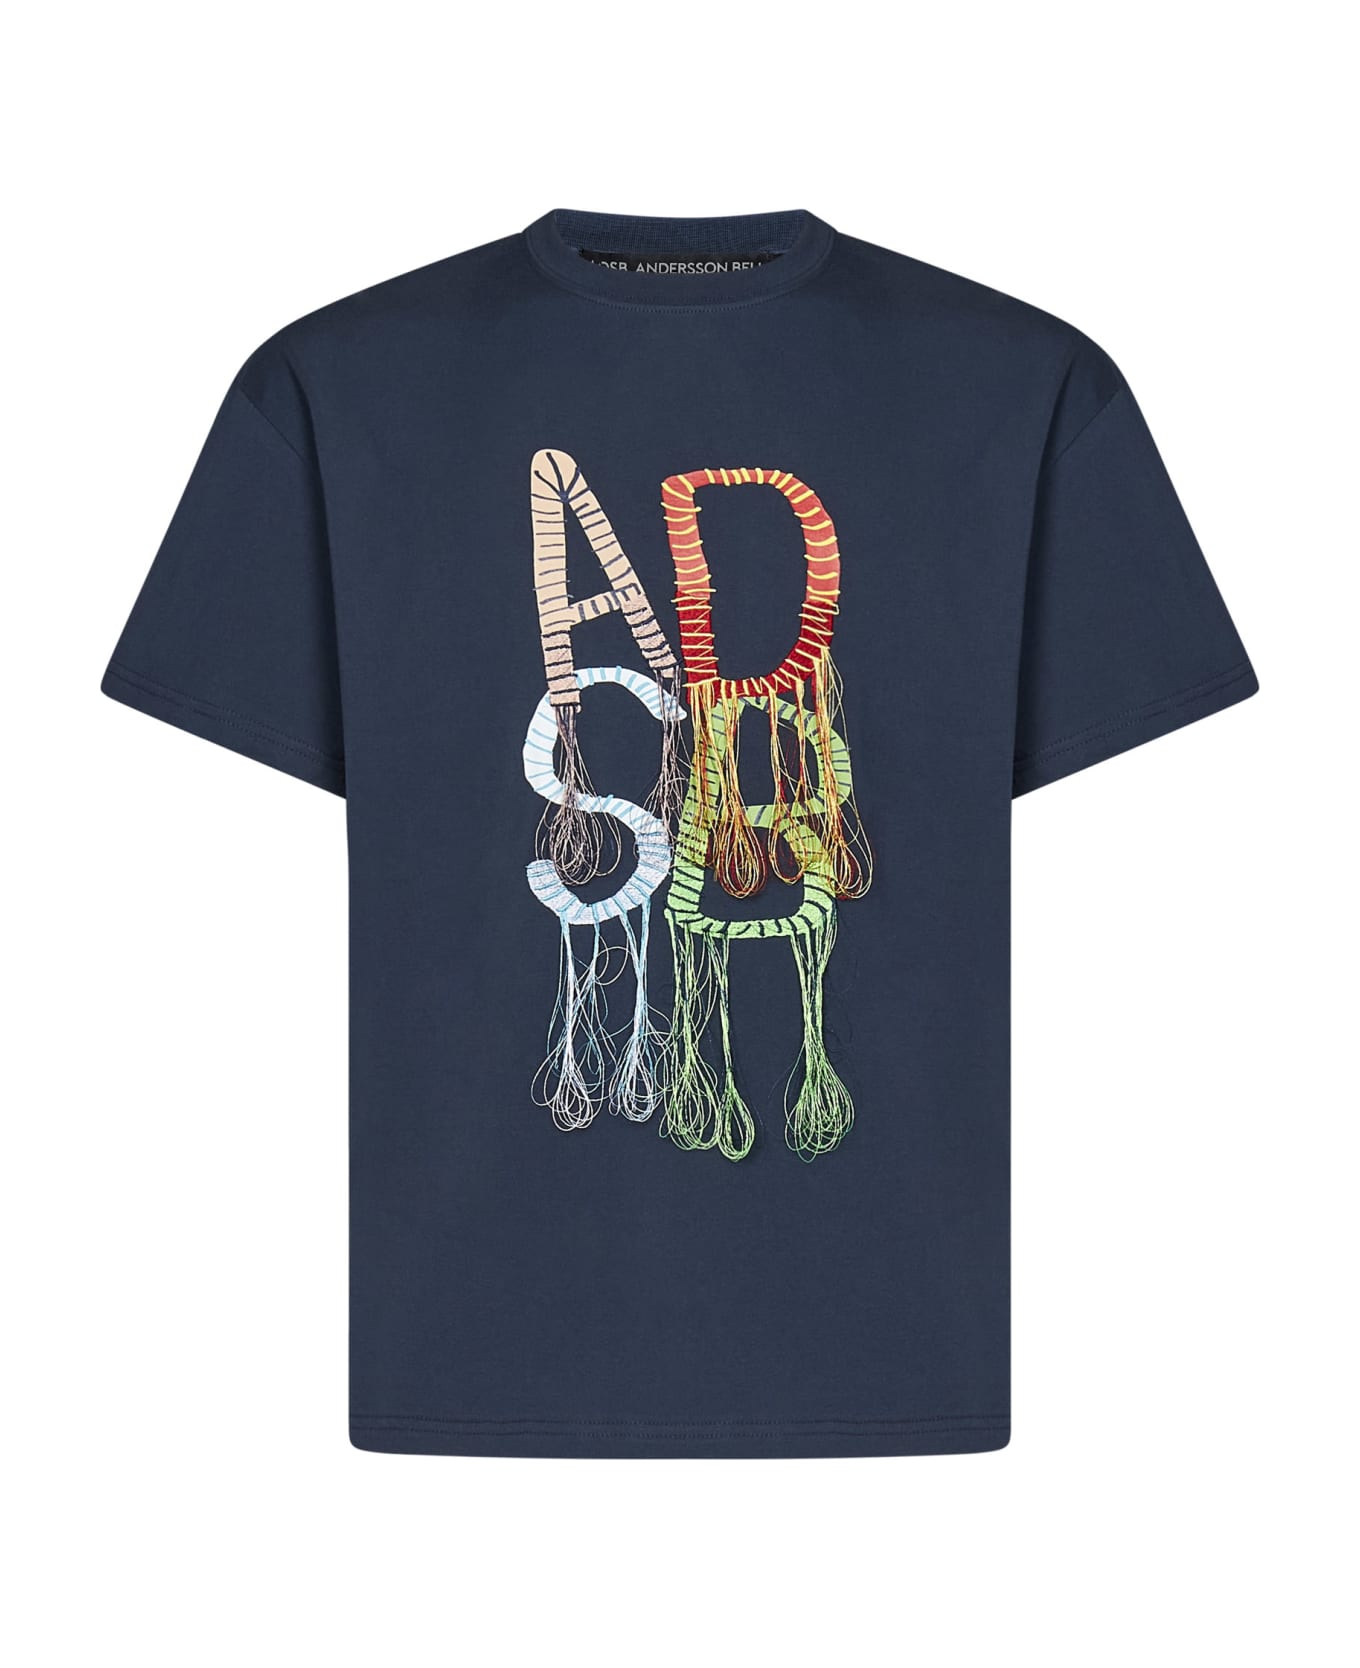 Andersson Bell T-shirt - Blu シャツ